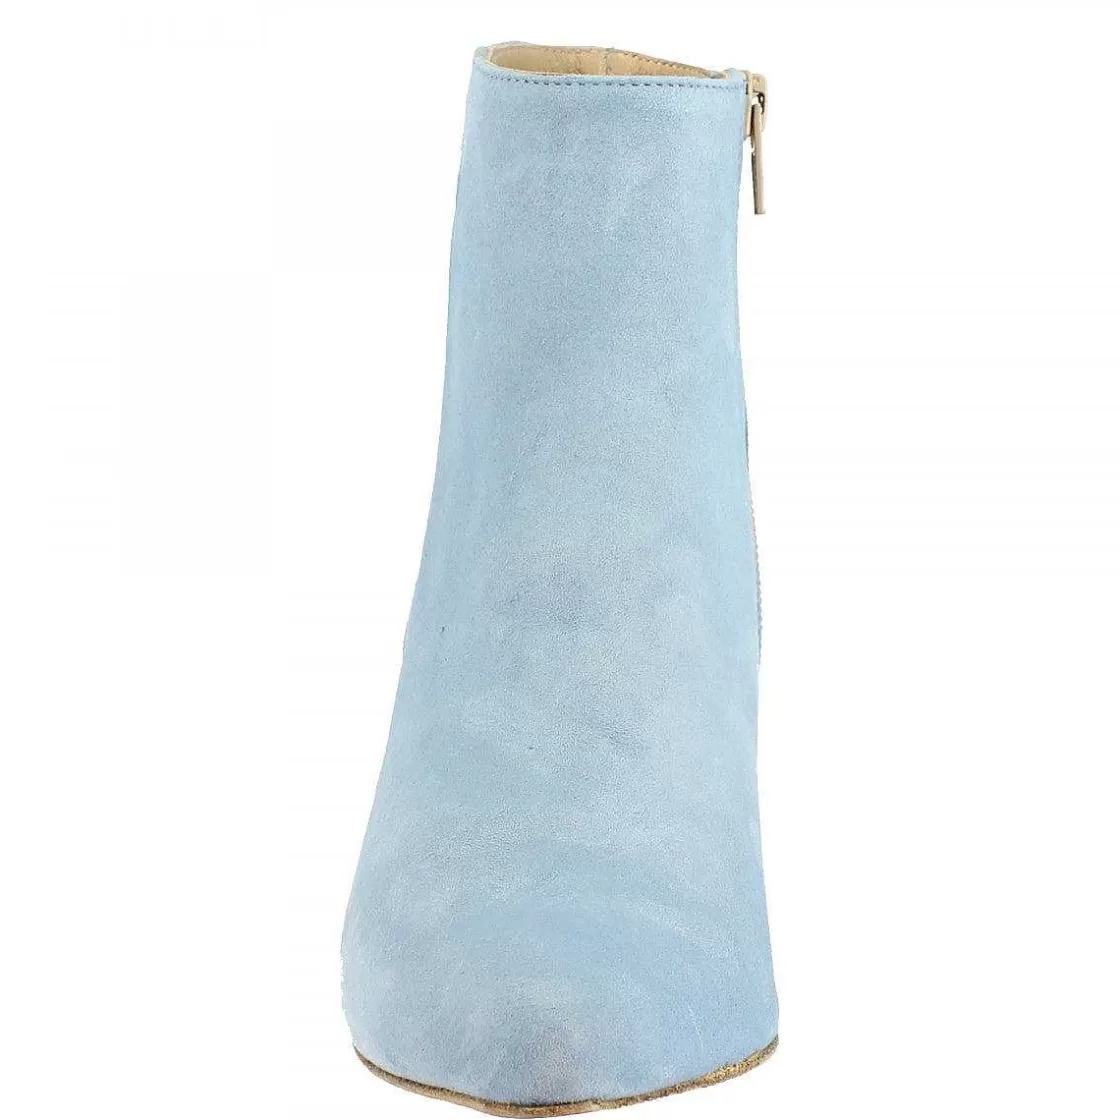 Leonardo Women'S Handmade Pointed Toe Heeled Ankle Boots In Light Blue Suede Leather Clearance